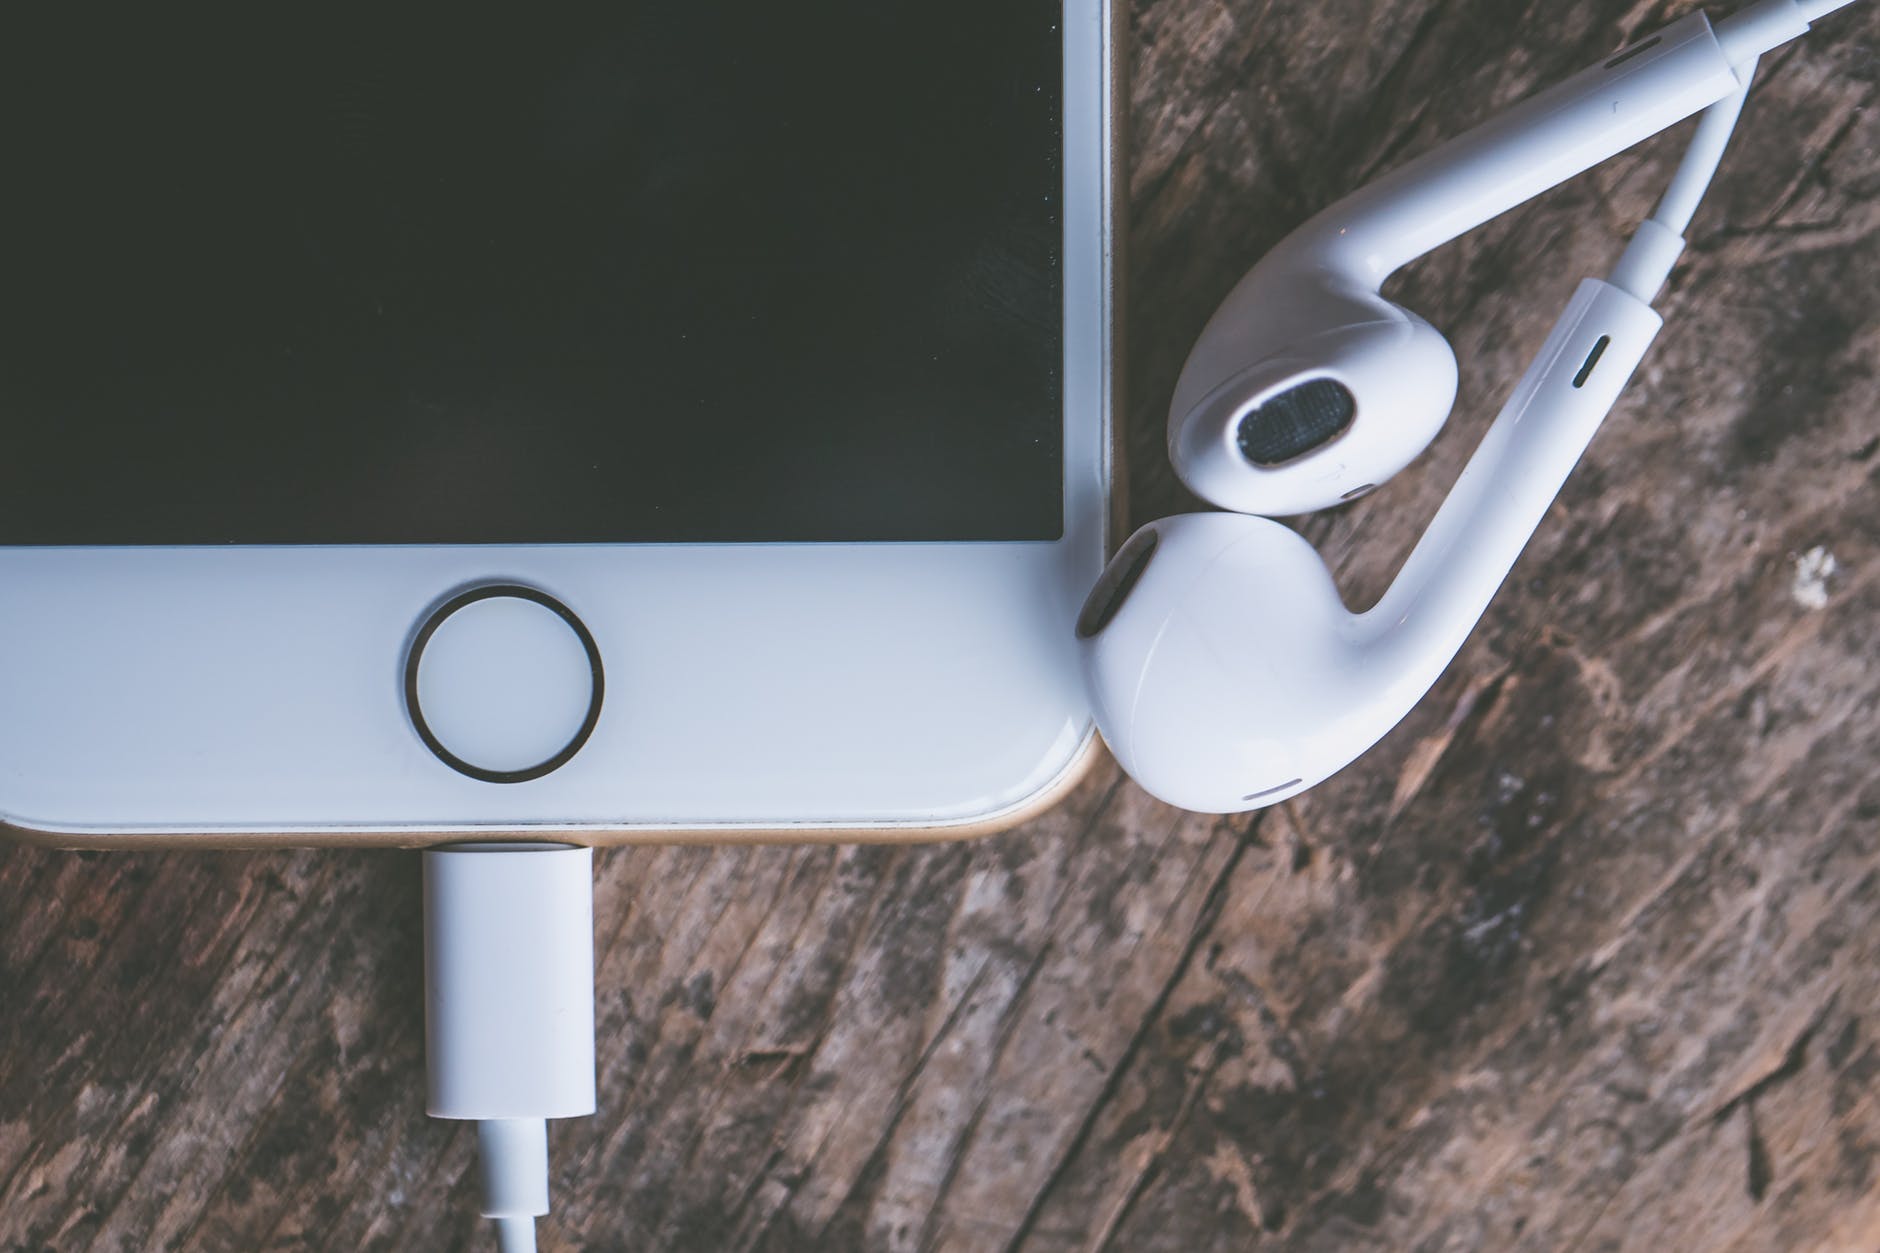 7 Key Podcasts to Help You Save Money